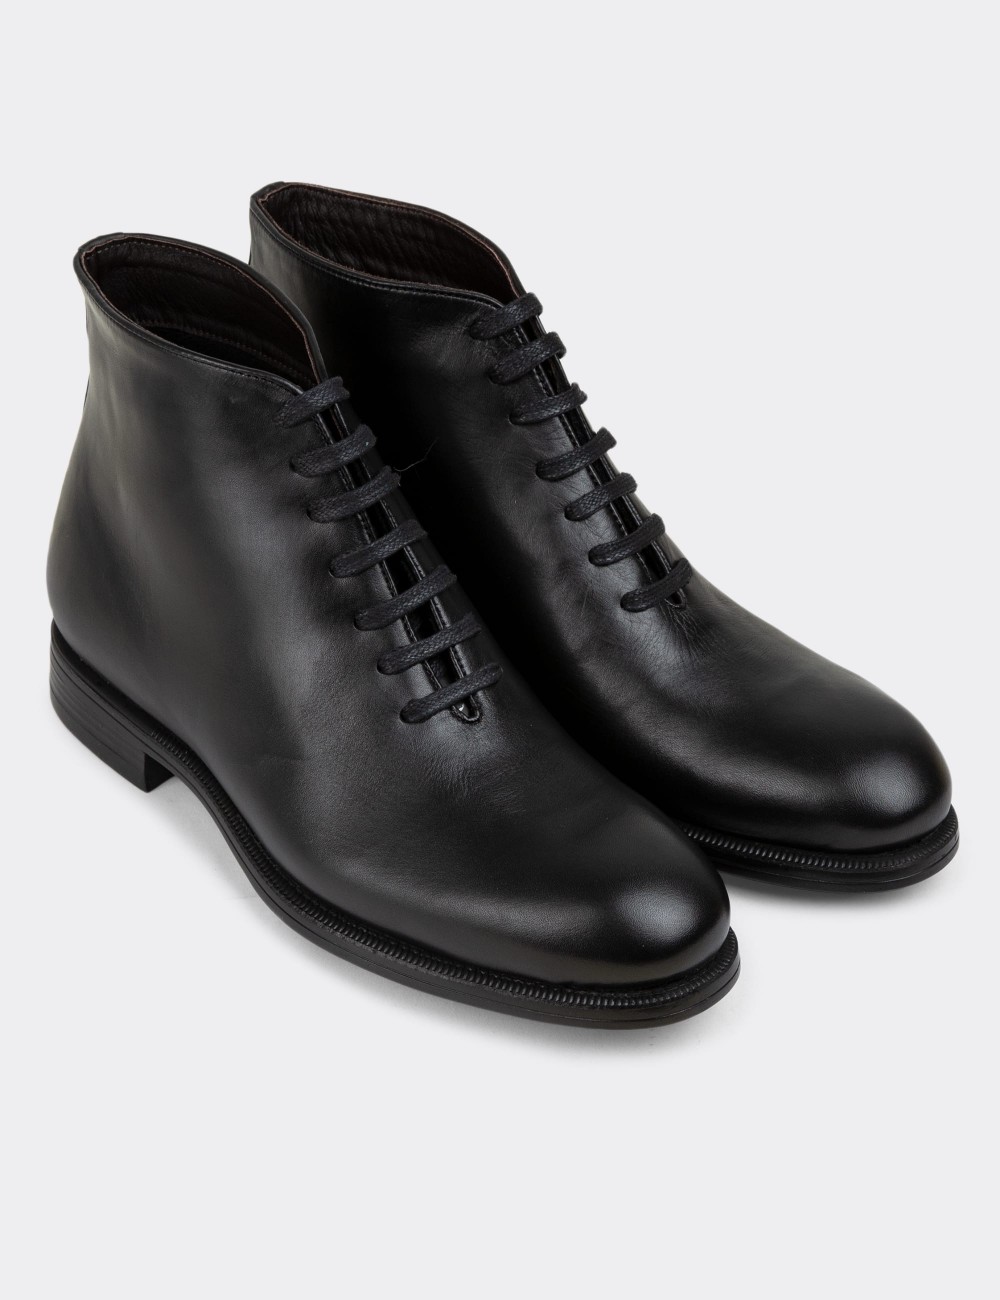 Black Leather Boots - 01918MSYHC01